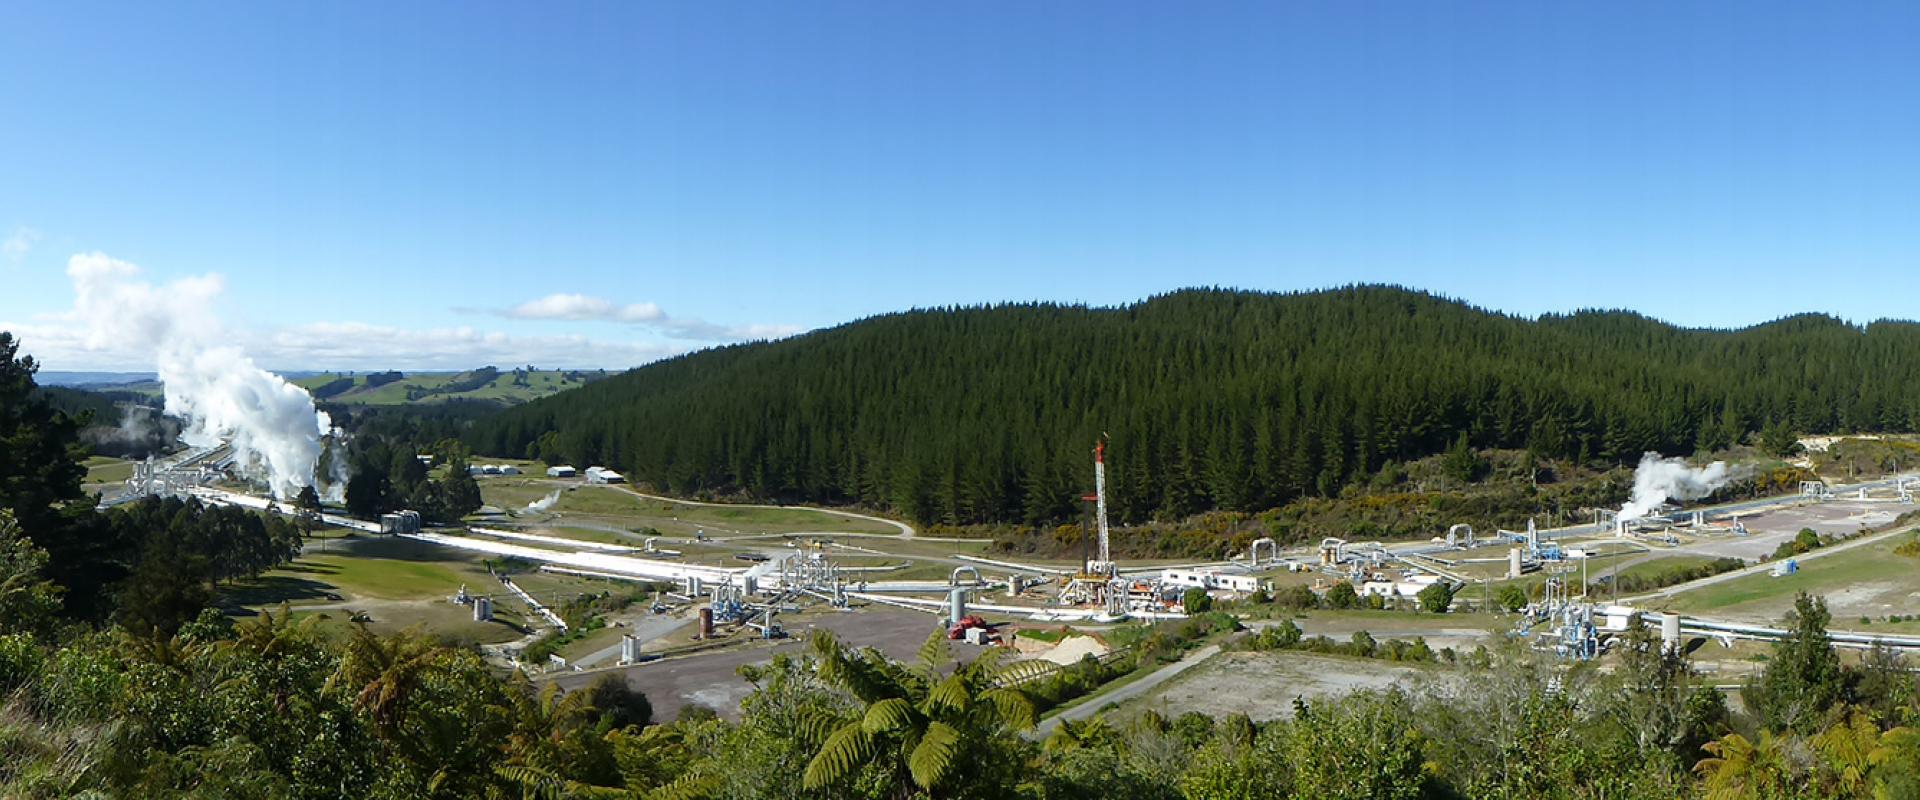 Panoramic view of the Warakei geothermal field